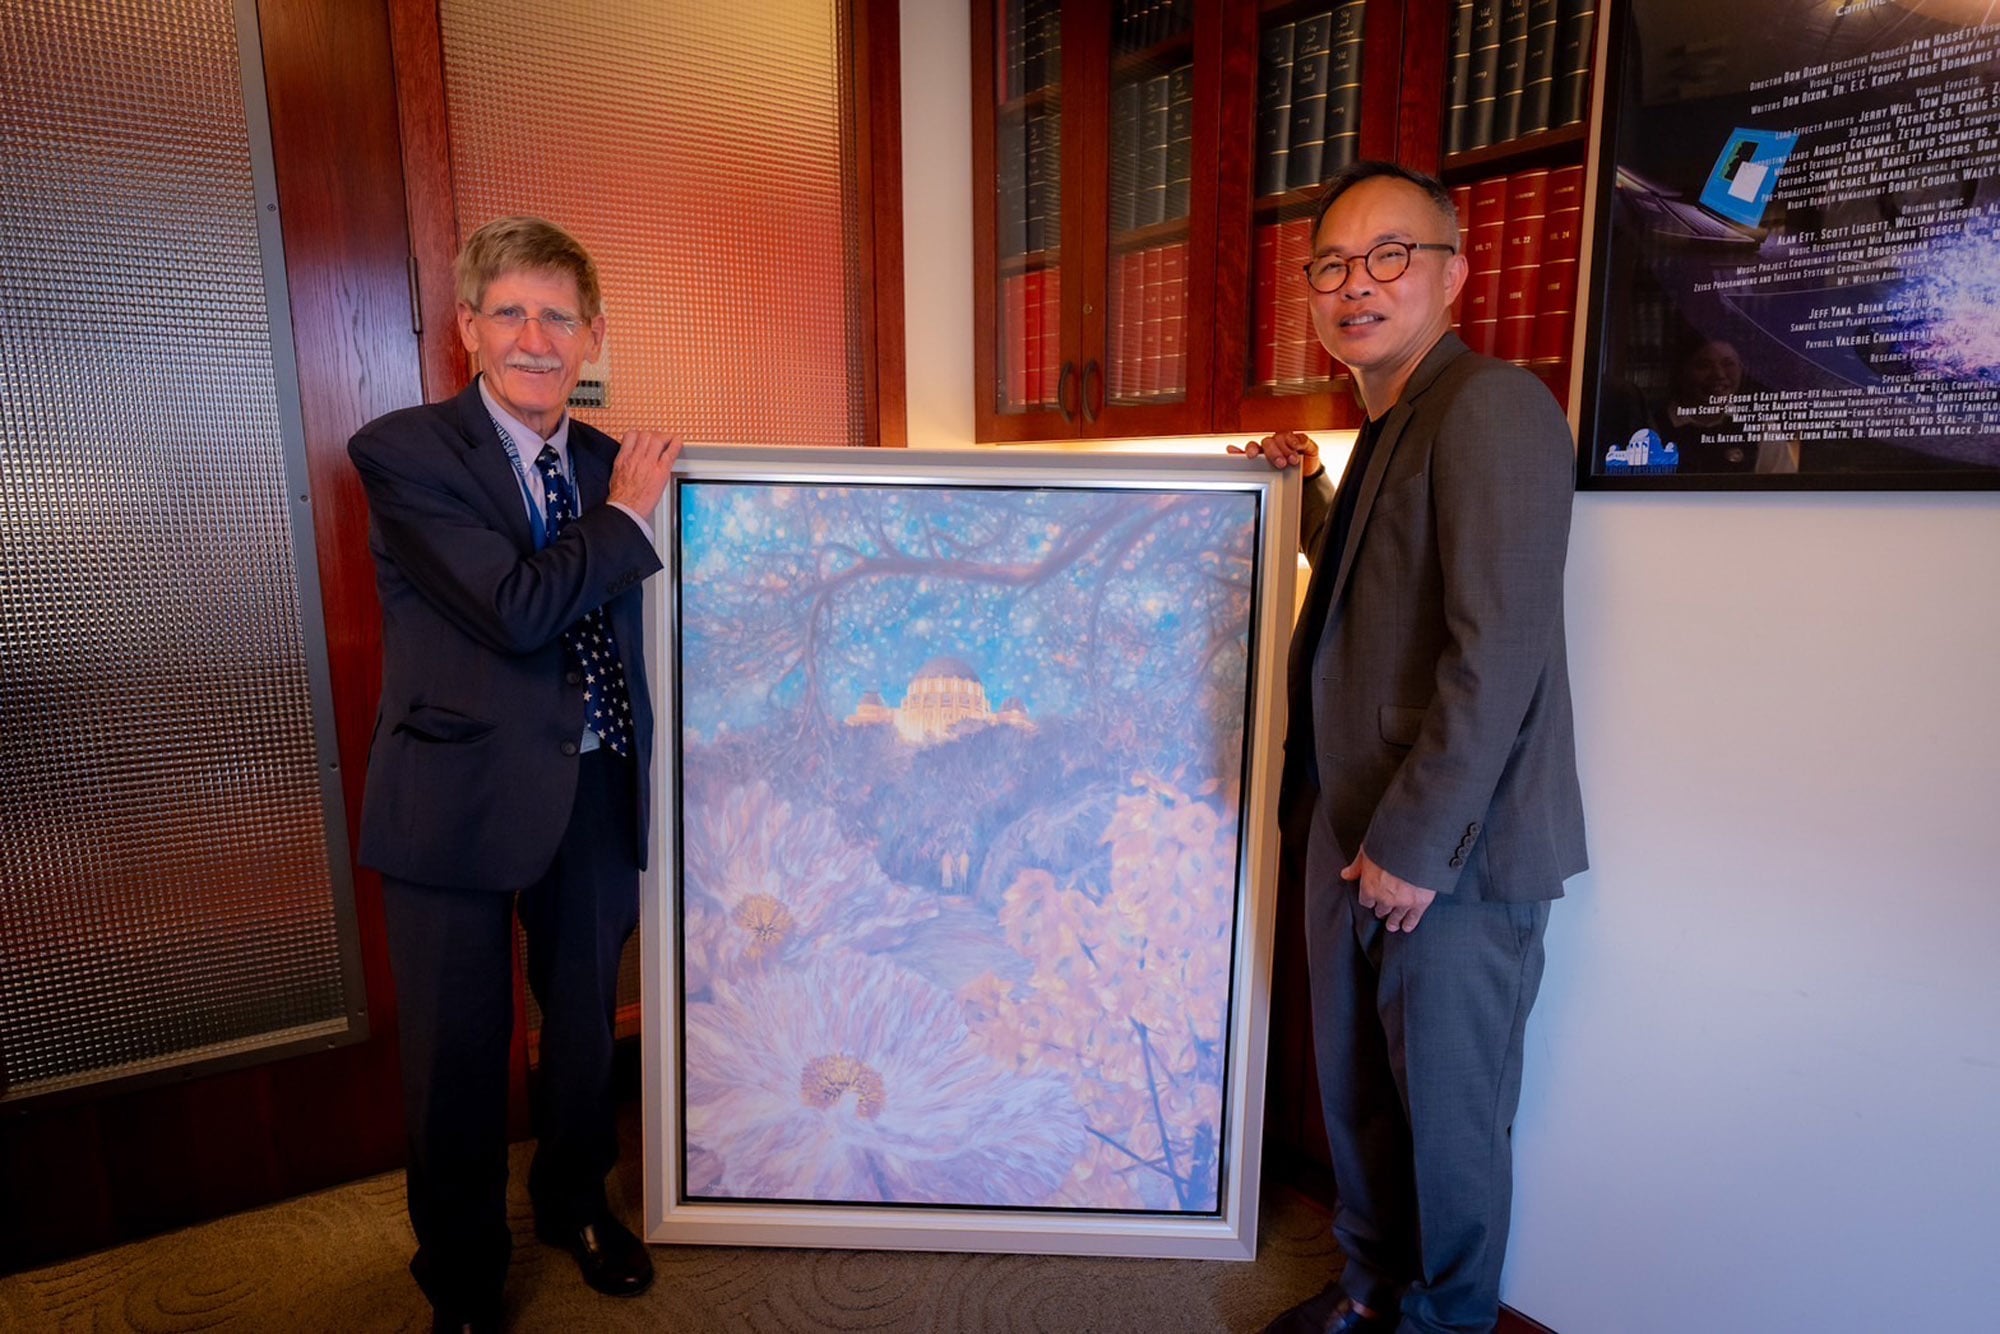 Waravut a Thai Artist, received a high honor from Dr. E. C. Krupp, Director of Griffith observatory